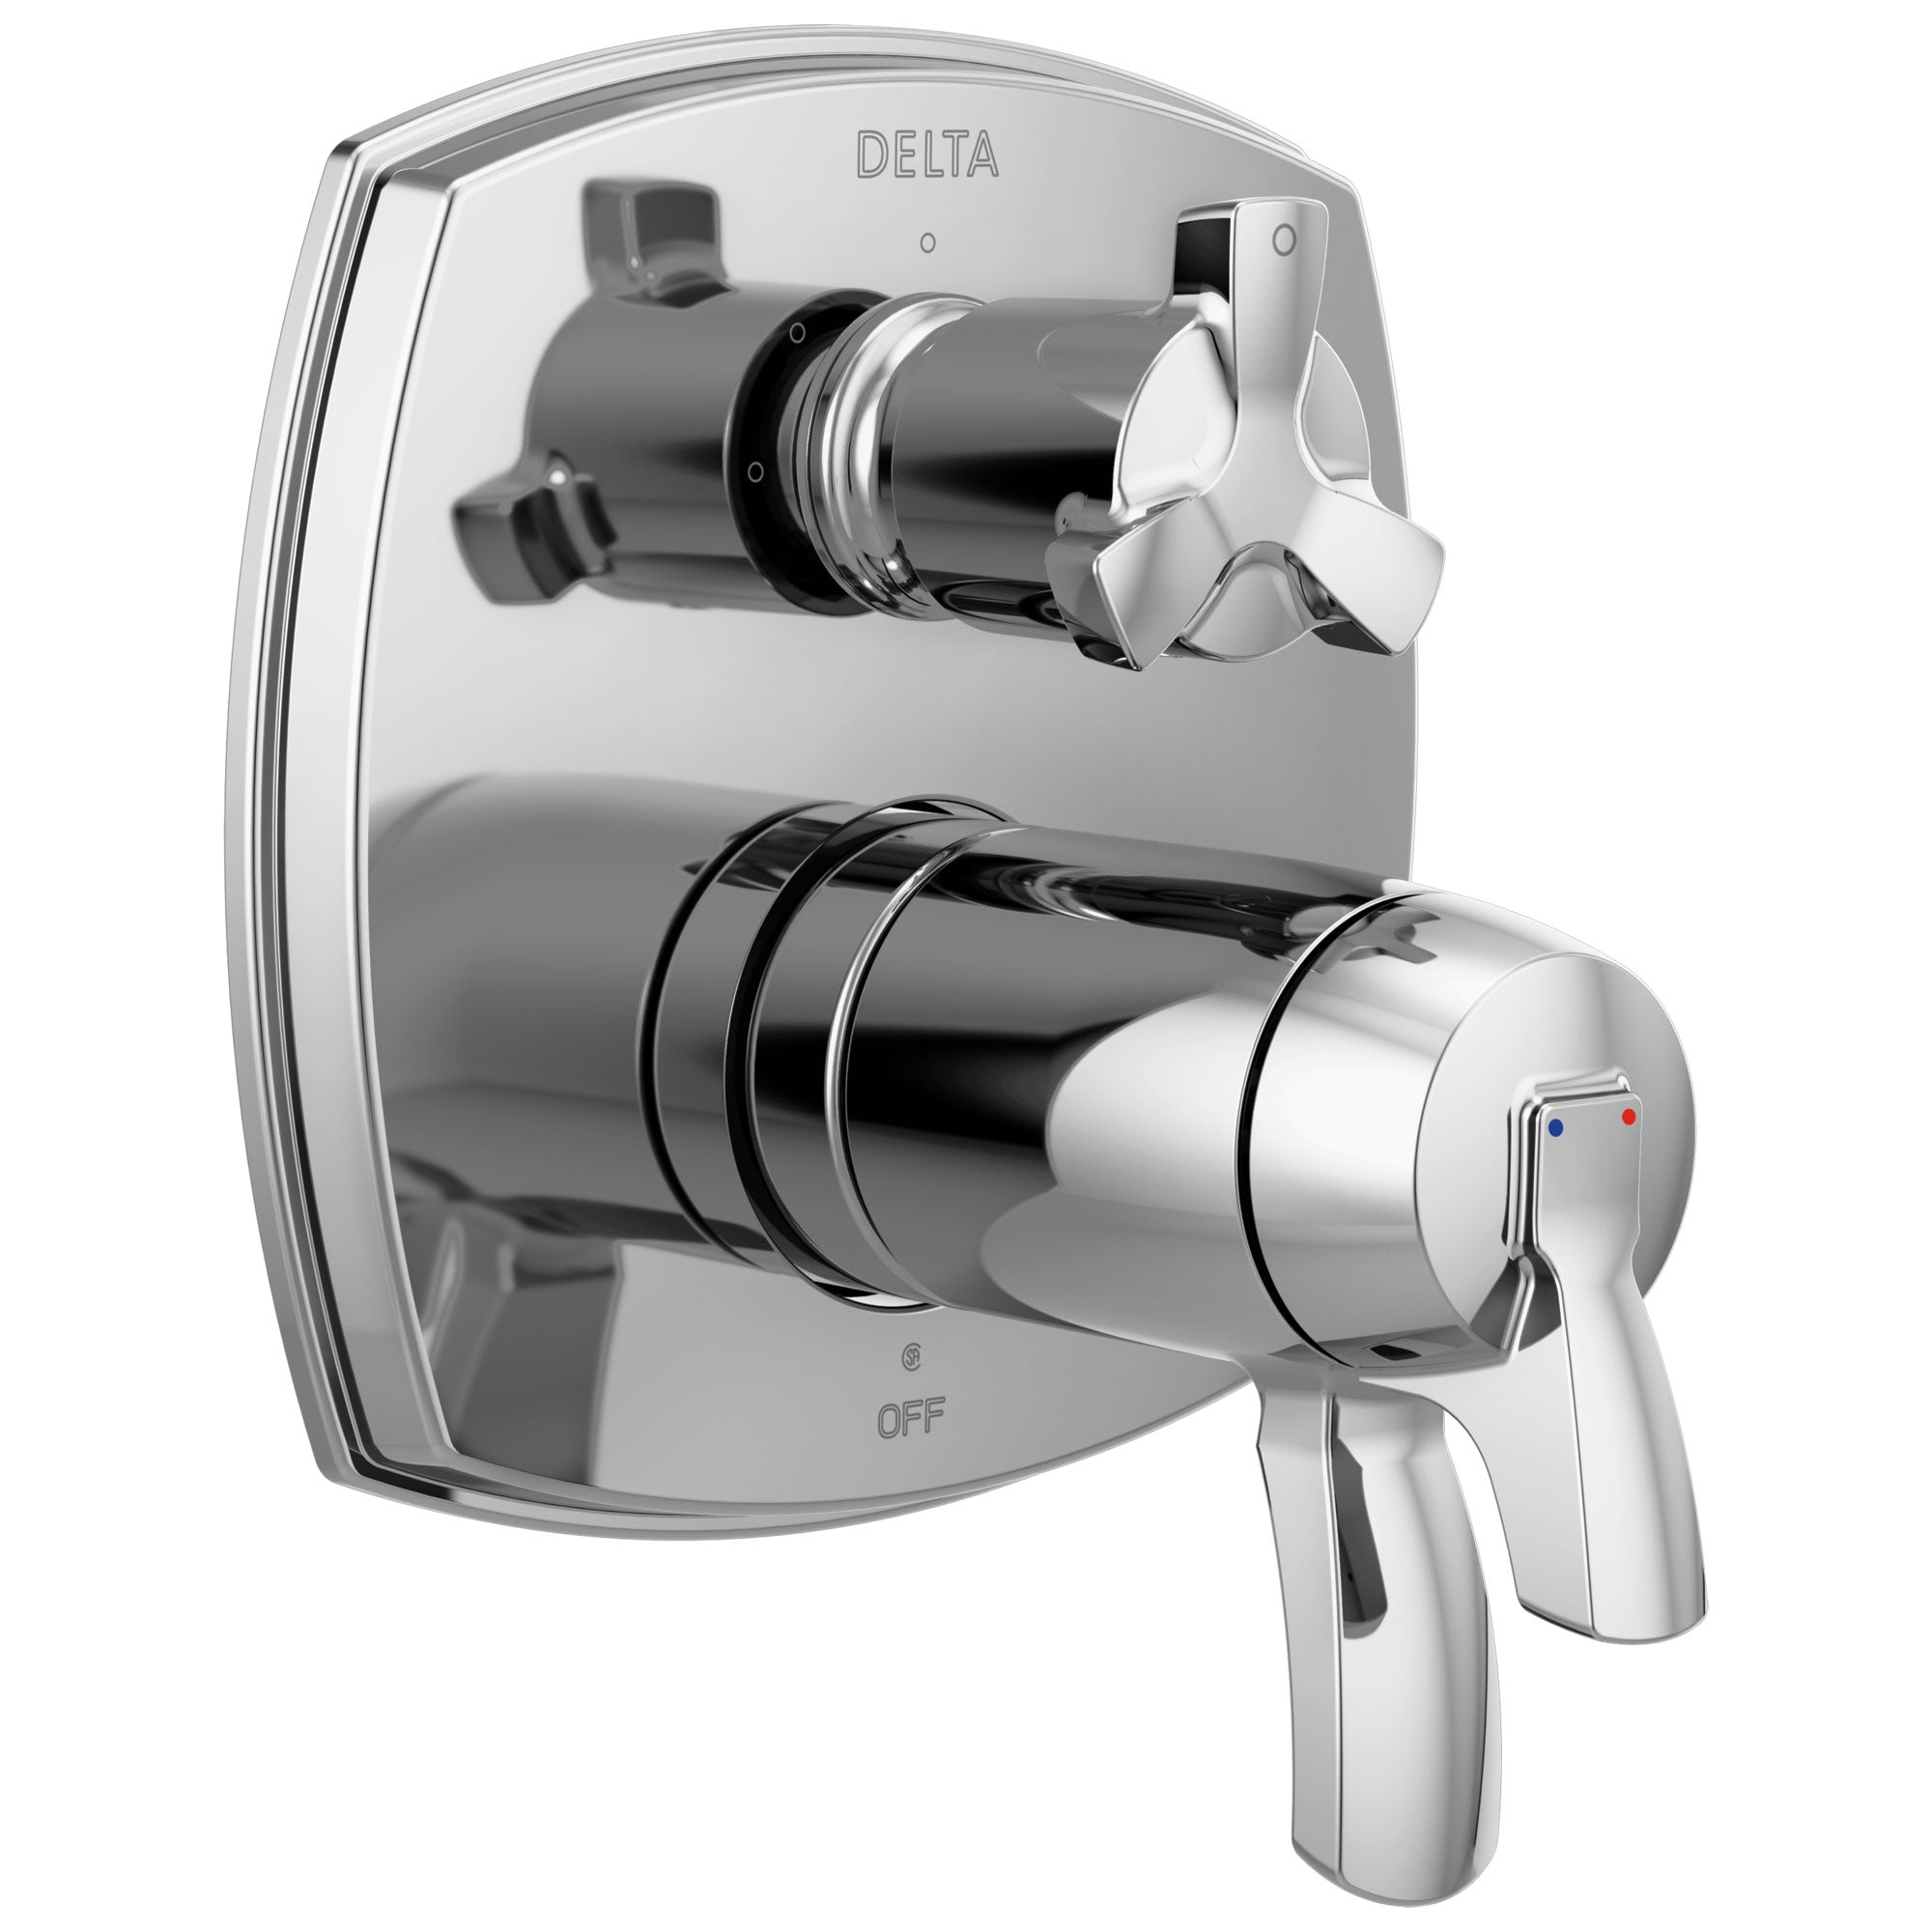 Delta Stryke Chrome Finish 3-setting Integrated Cross Handle Diverter Thermostatic Shower System Control Includes Rough-in Valve and Handles D3099V